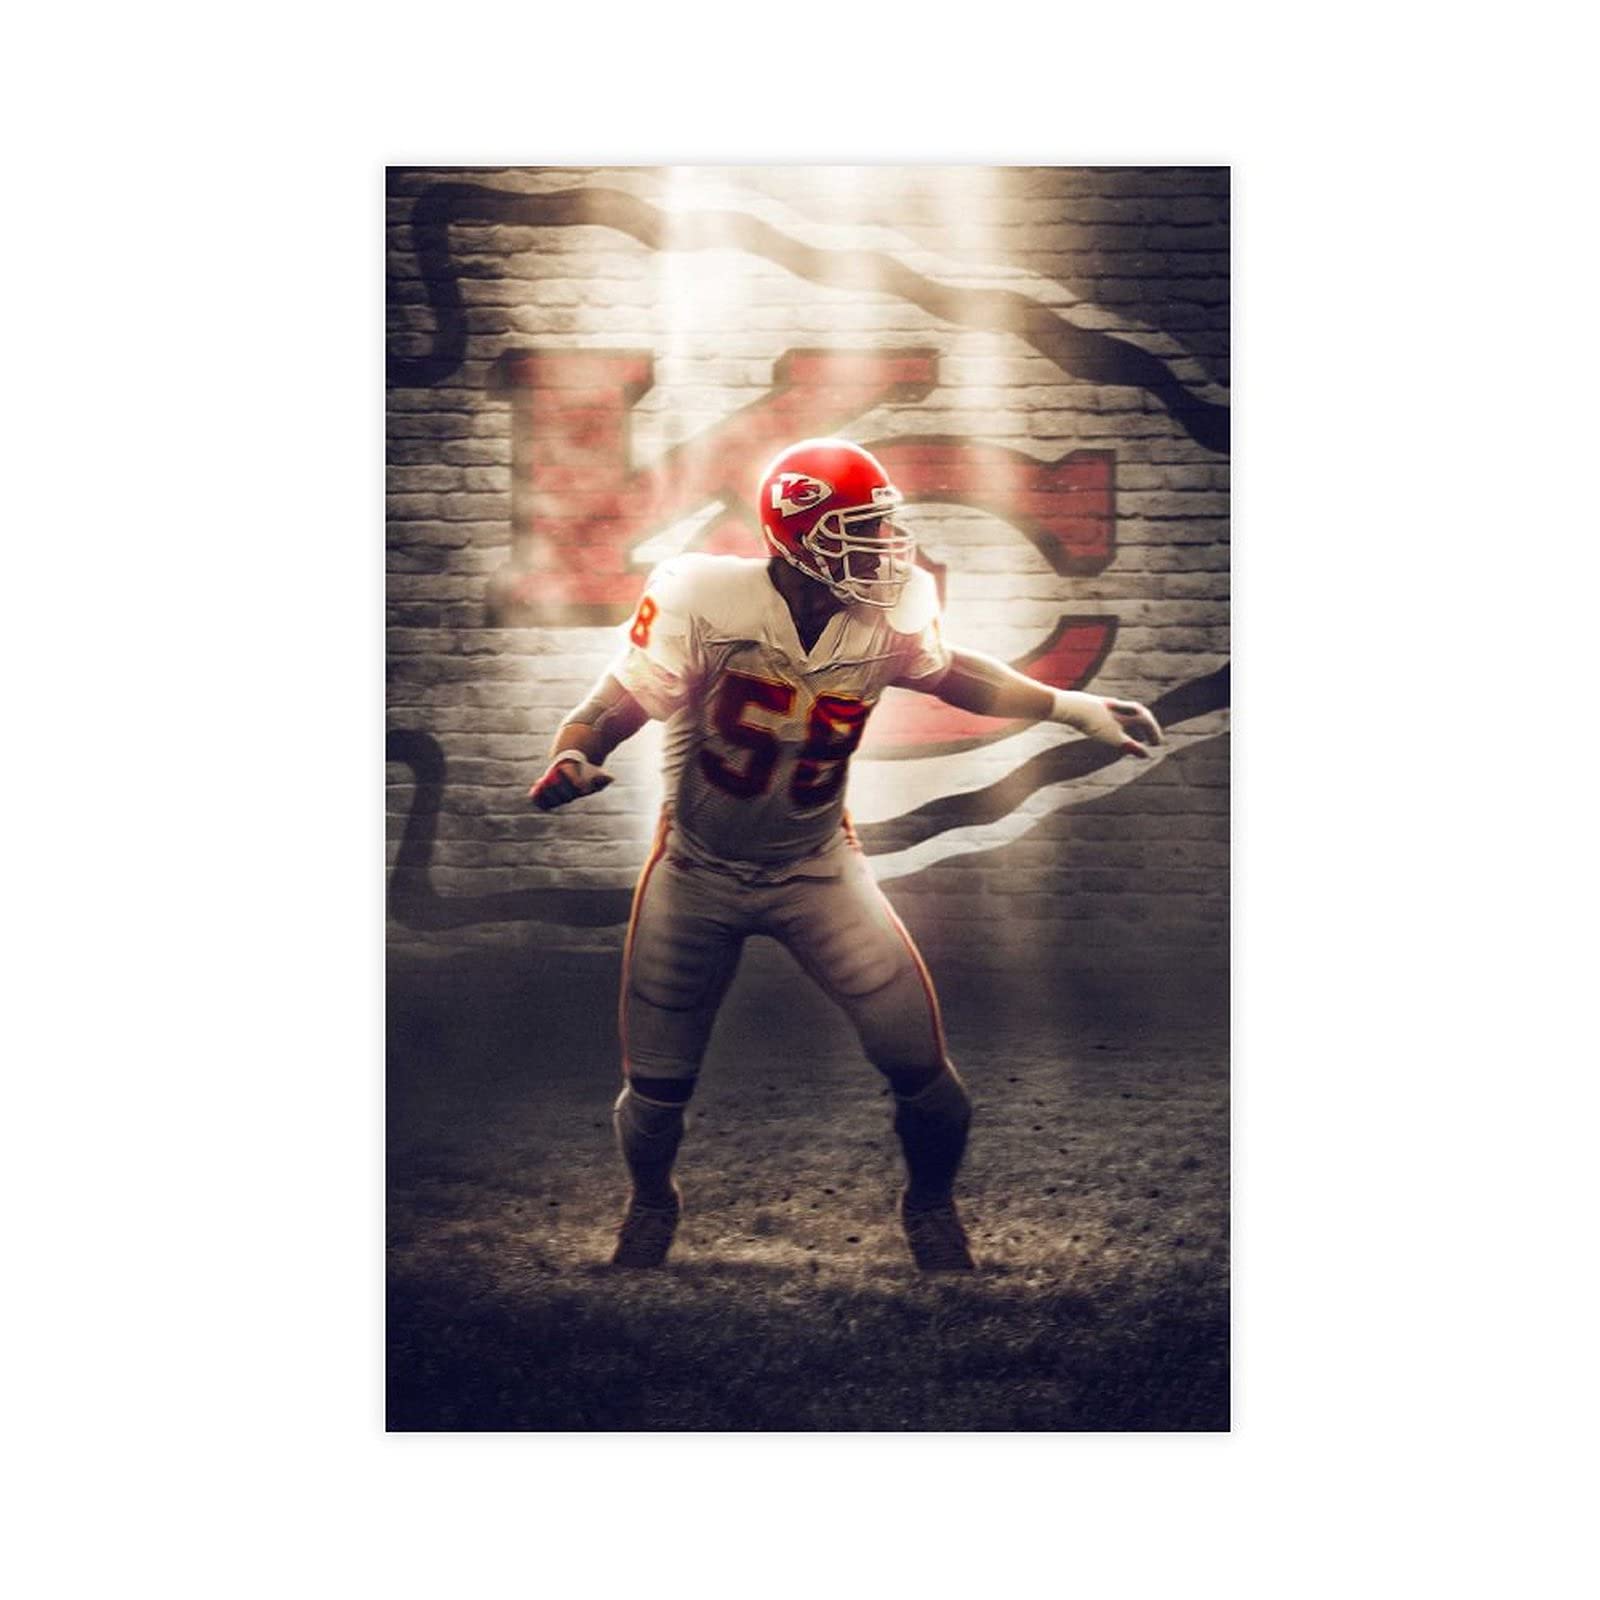 Derrick Thomas Football Poster Wall Art Canvas Wall Art Decor Print Picture Paintings for Living Room Bedroom Decoration Unframe:24x36inch(60x90cm): Posters & Prints